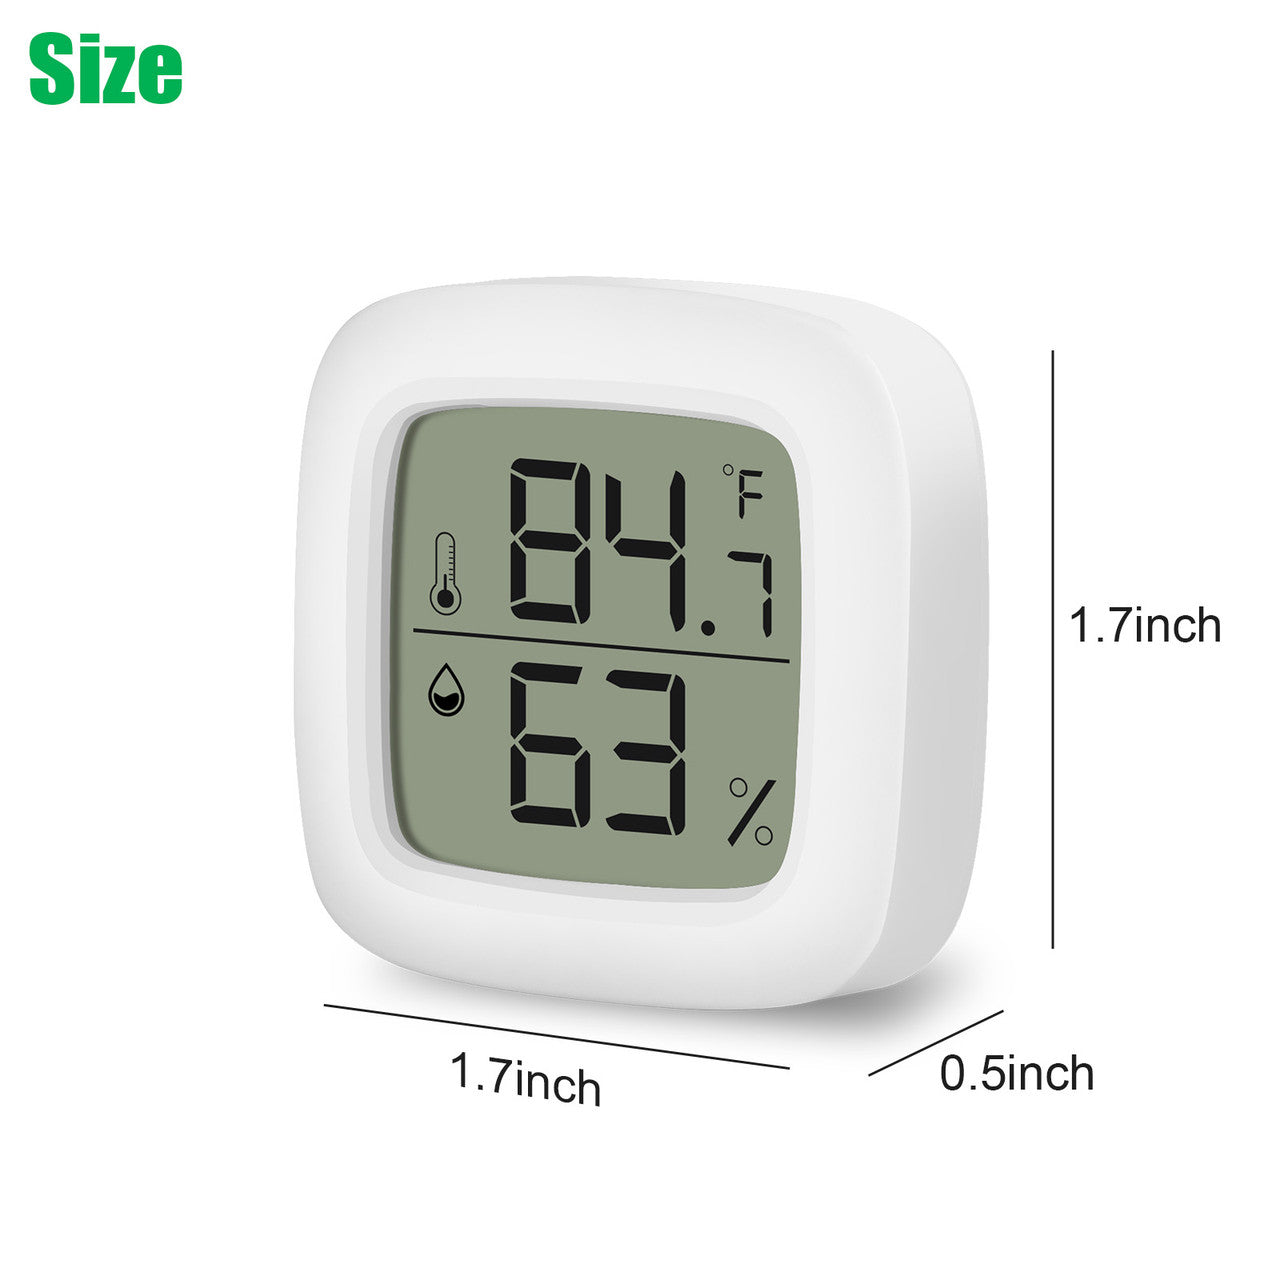 Digital Thermohygrometer with a Compact LCD Display, Lightweight and Compact, 2Pack